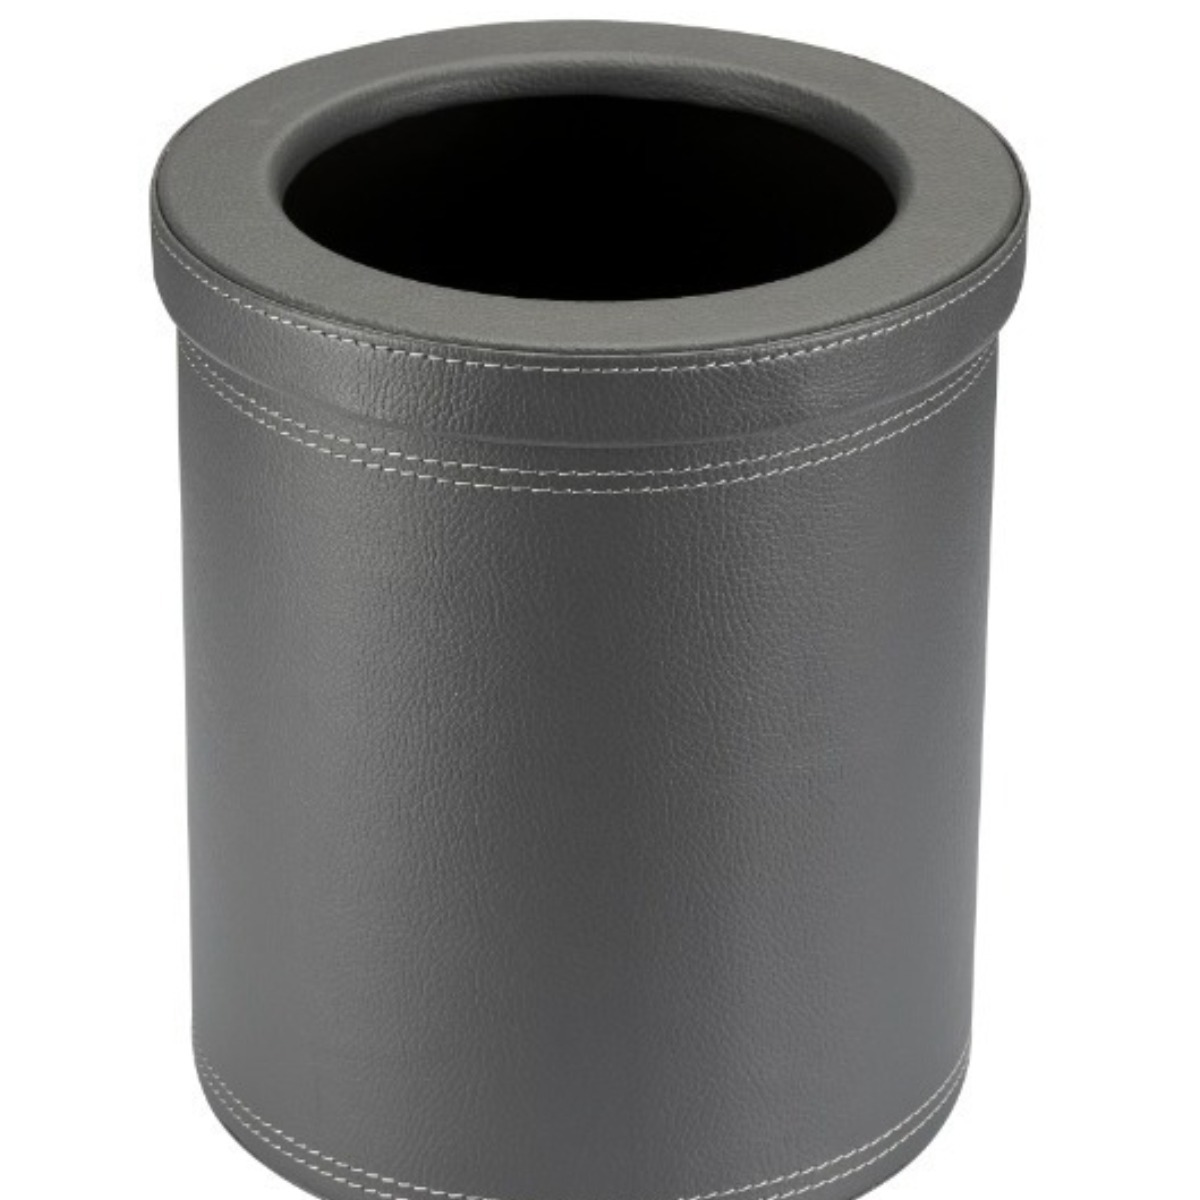 AB-314 Leather Lined Dustbin